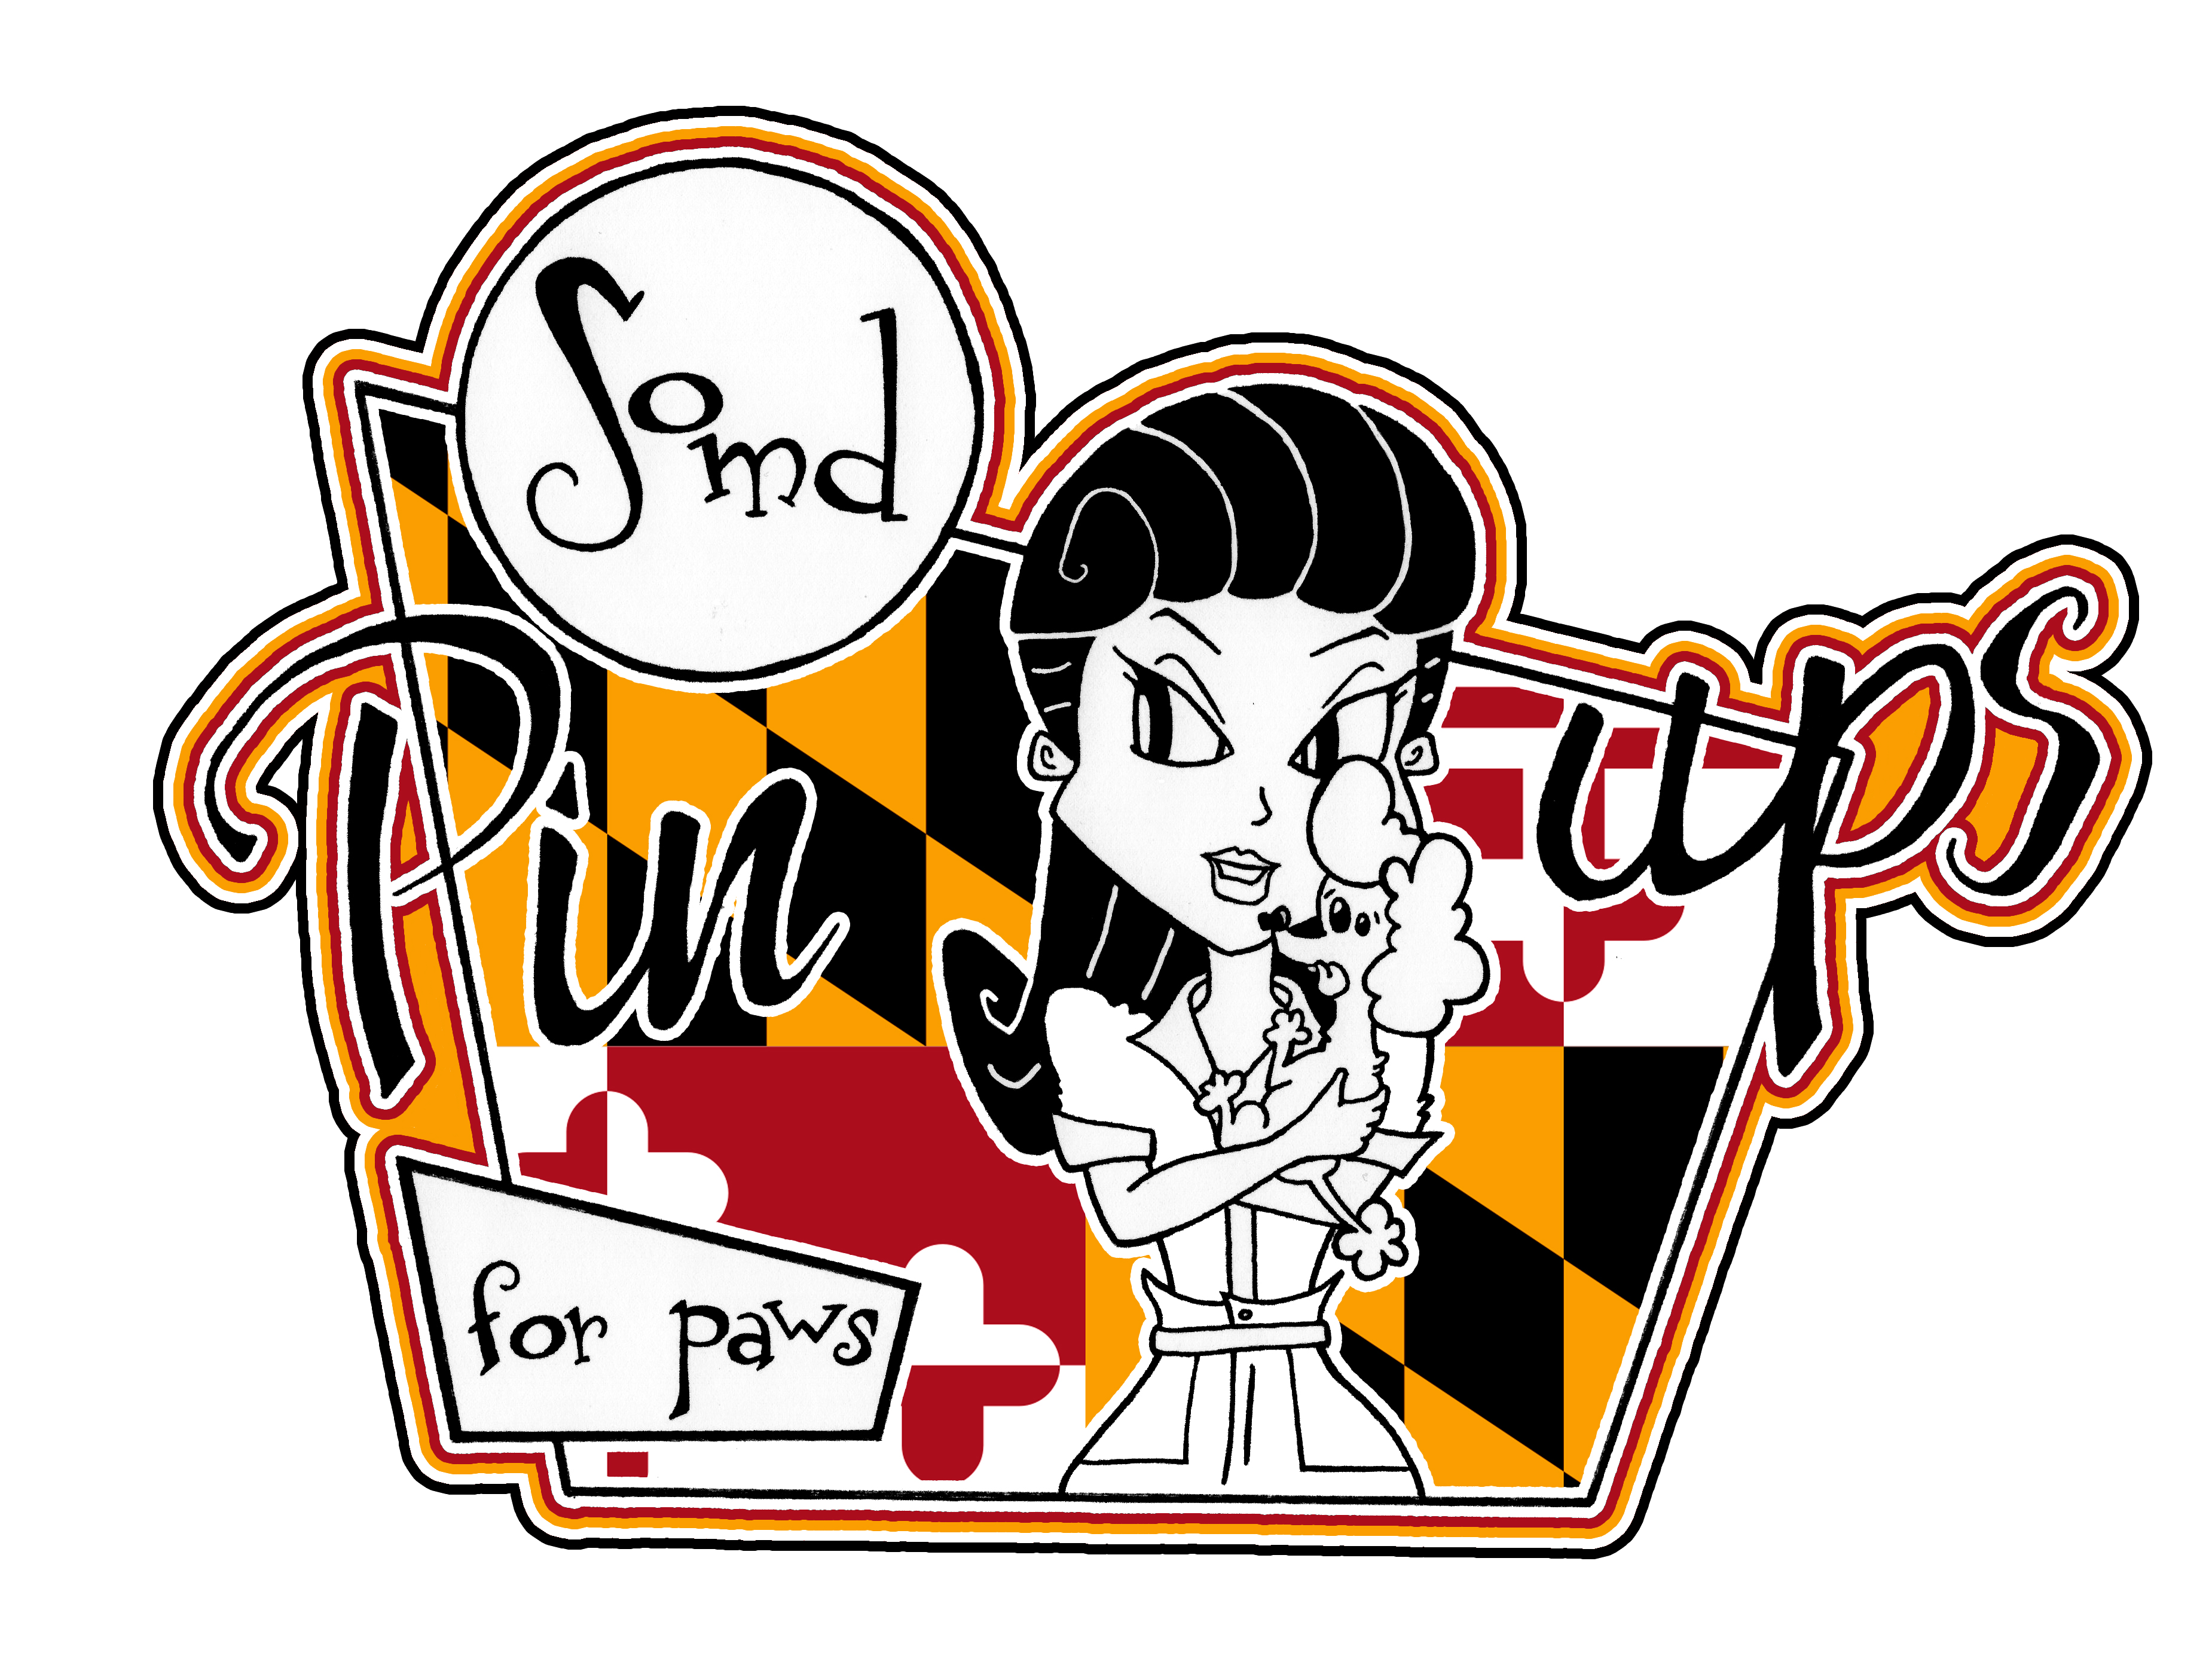 SOMD PinUps for Paws